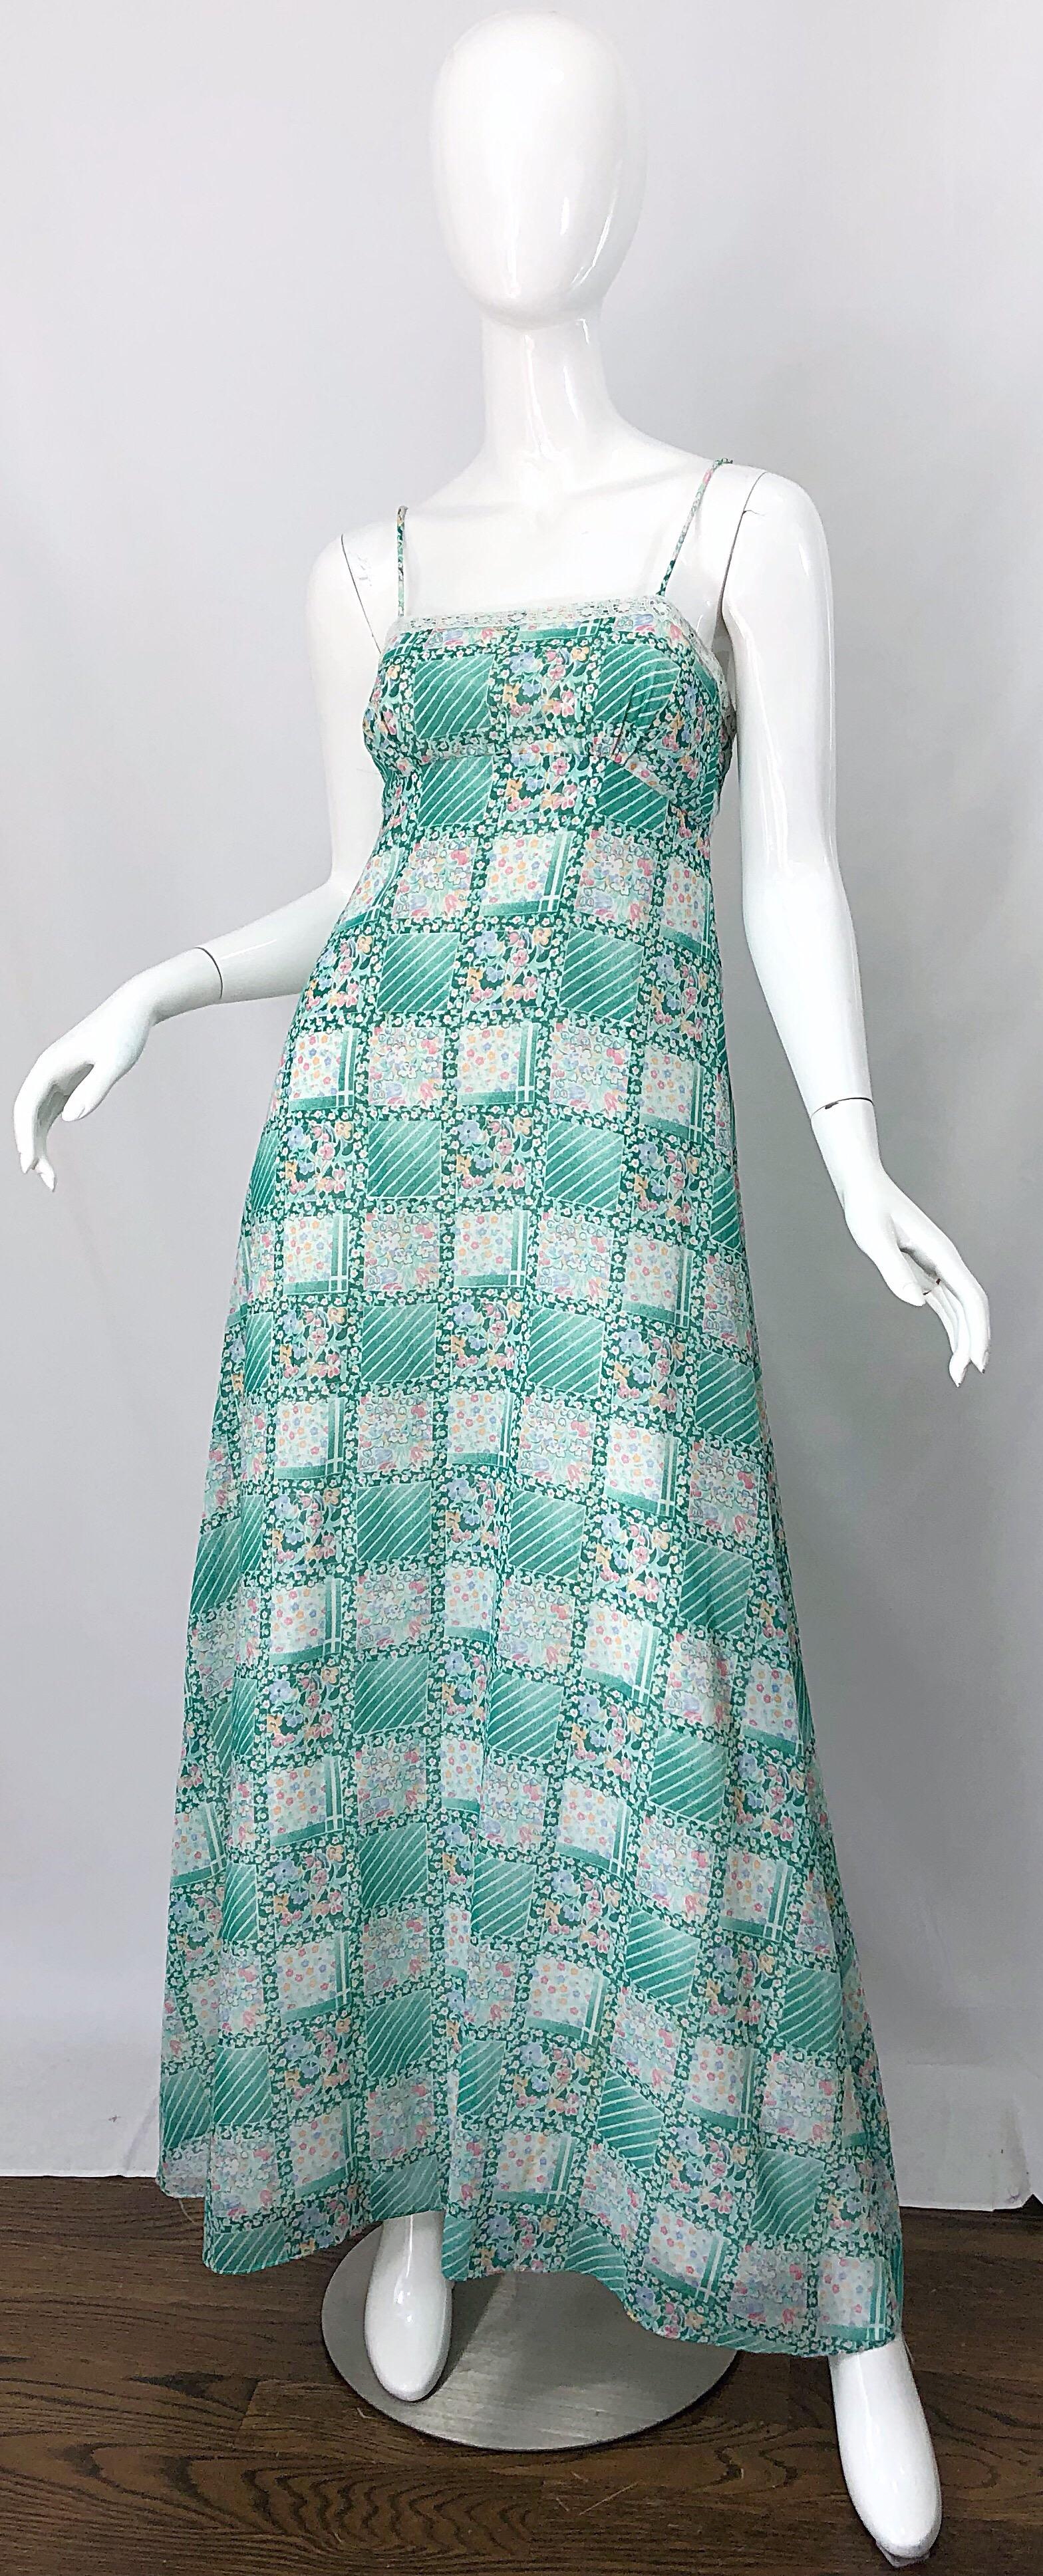 Beautiful vintage 1970s teal green / blue and pink cotton and lace maxi dress! Features a fitted spaghetti strap sleeveless bodice trimmed in lace on the front and back. Forgiving and flattering full length full skirt. Printed squares features